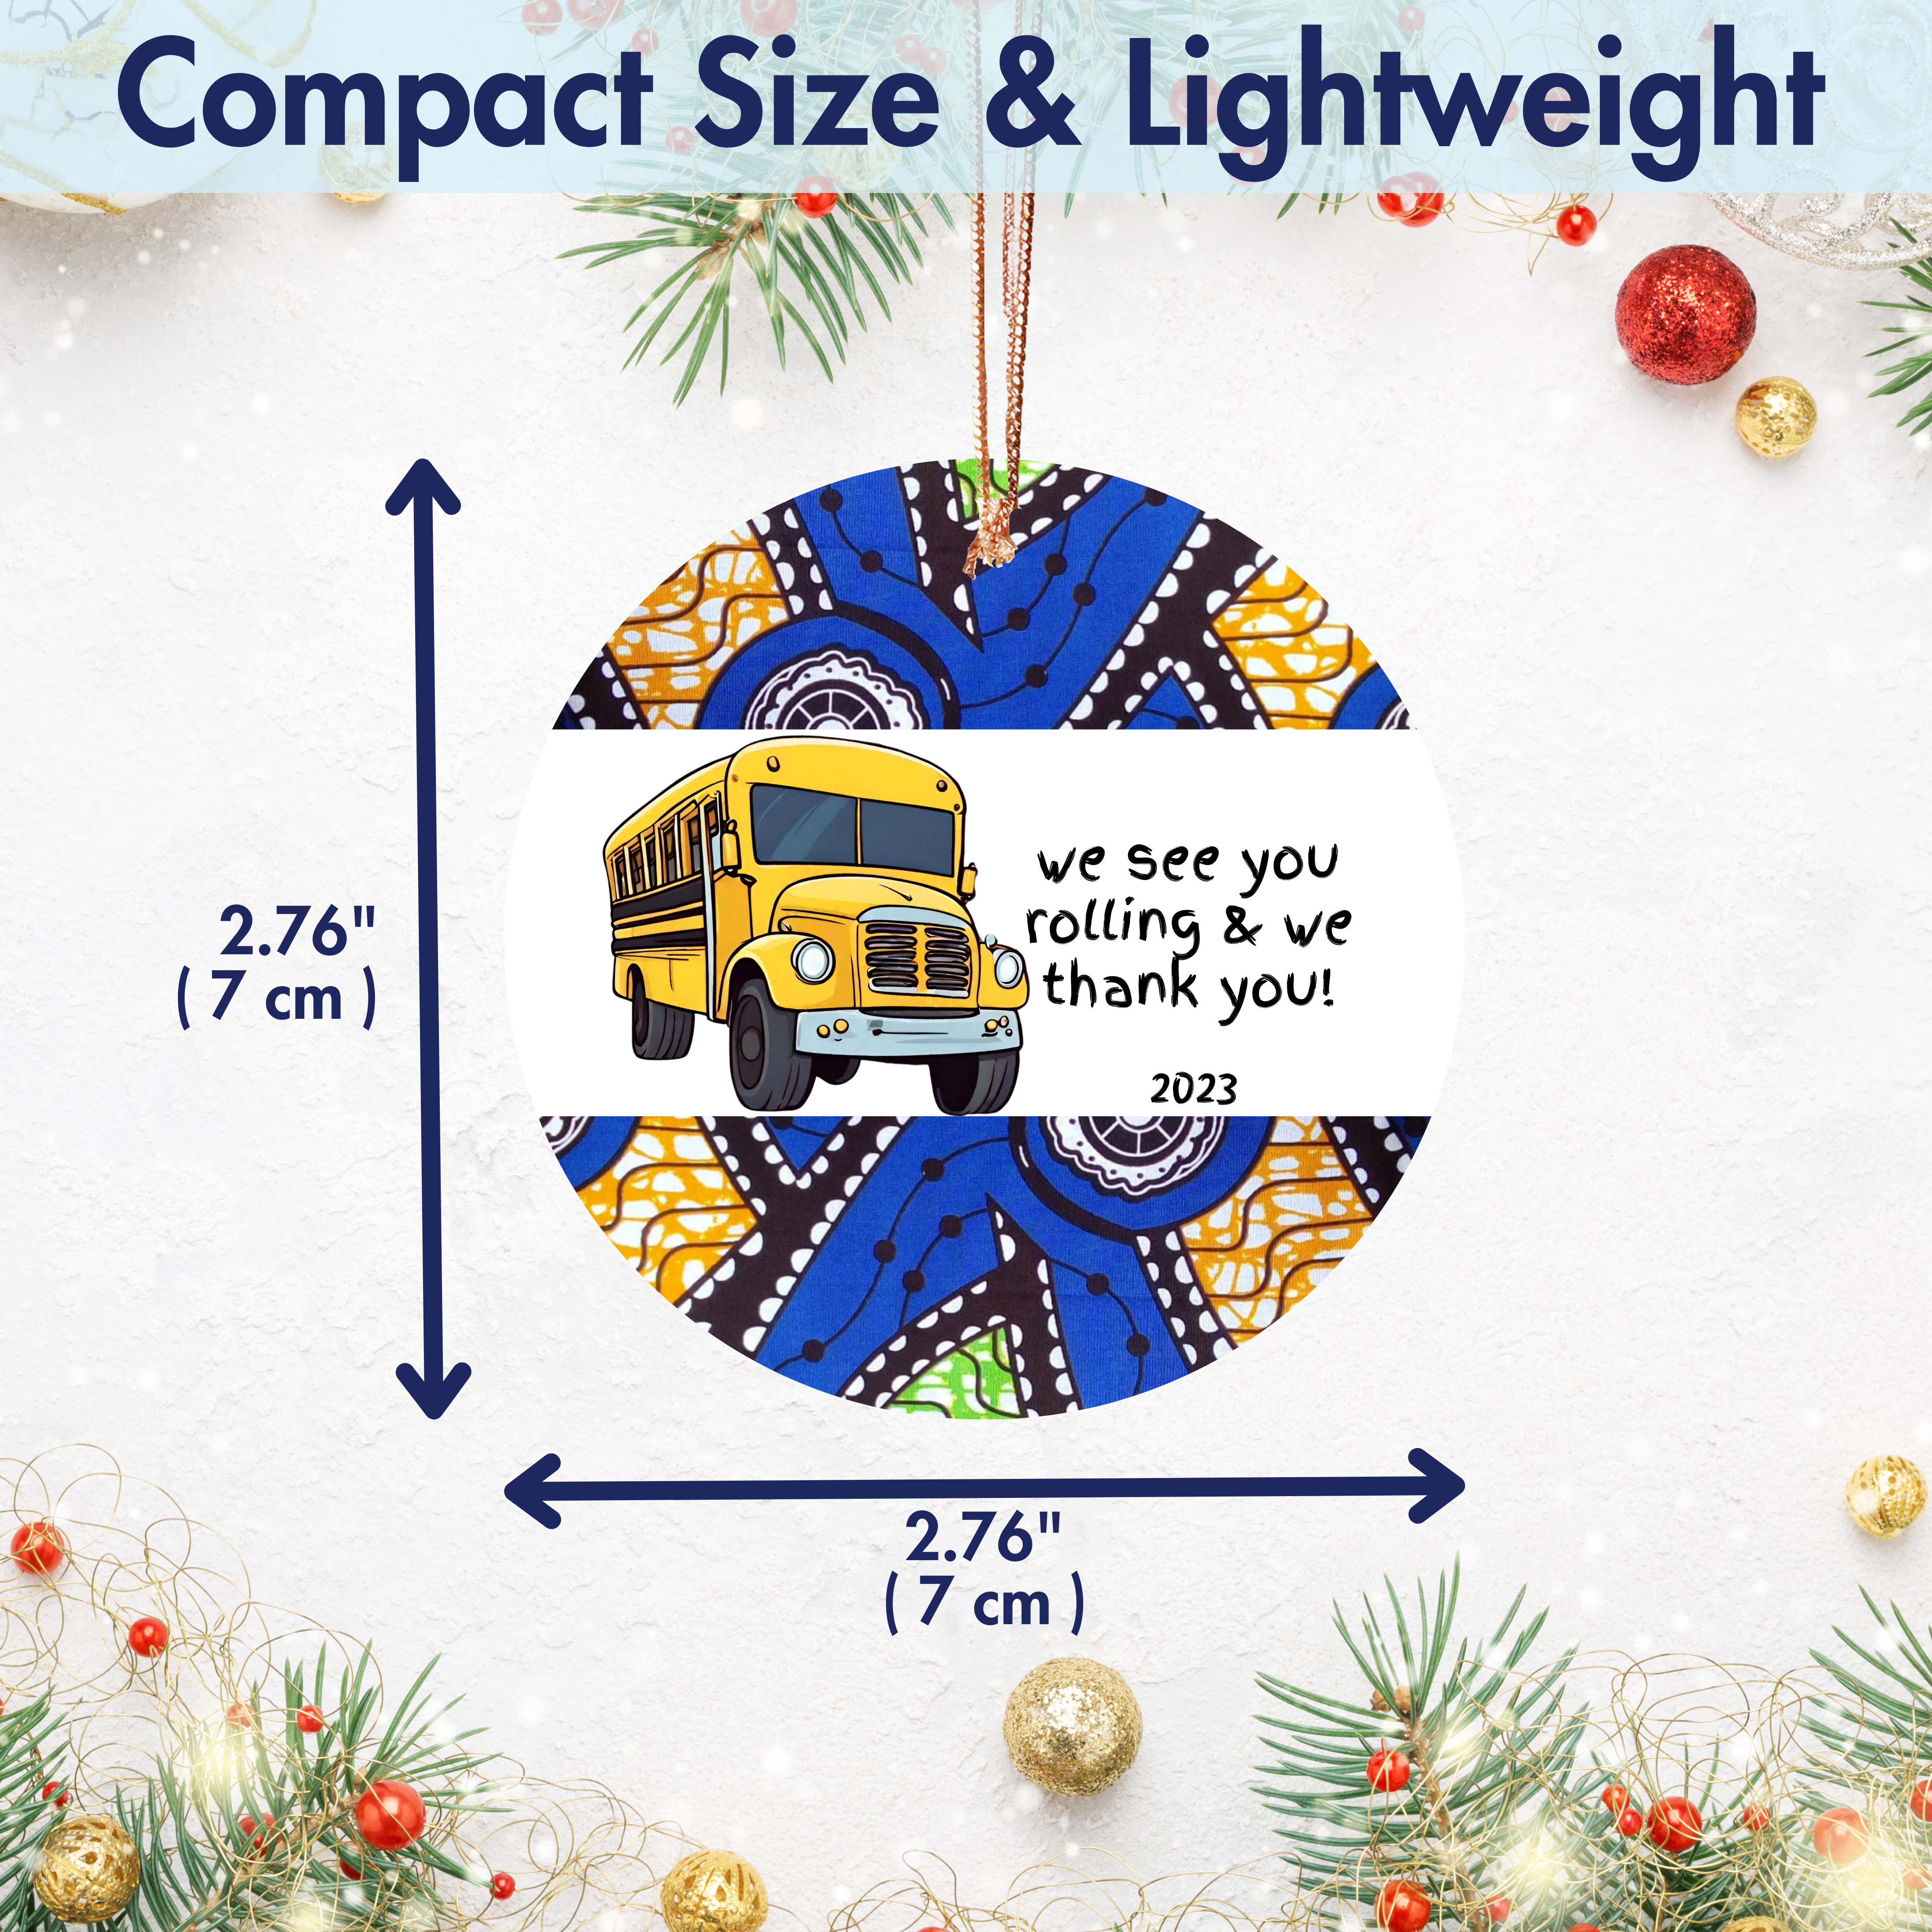 Holiday Ornament for School Bus Driver - African Print Inspired